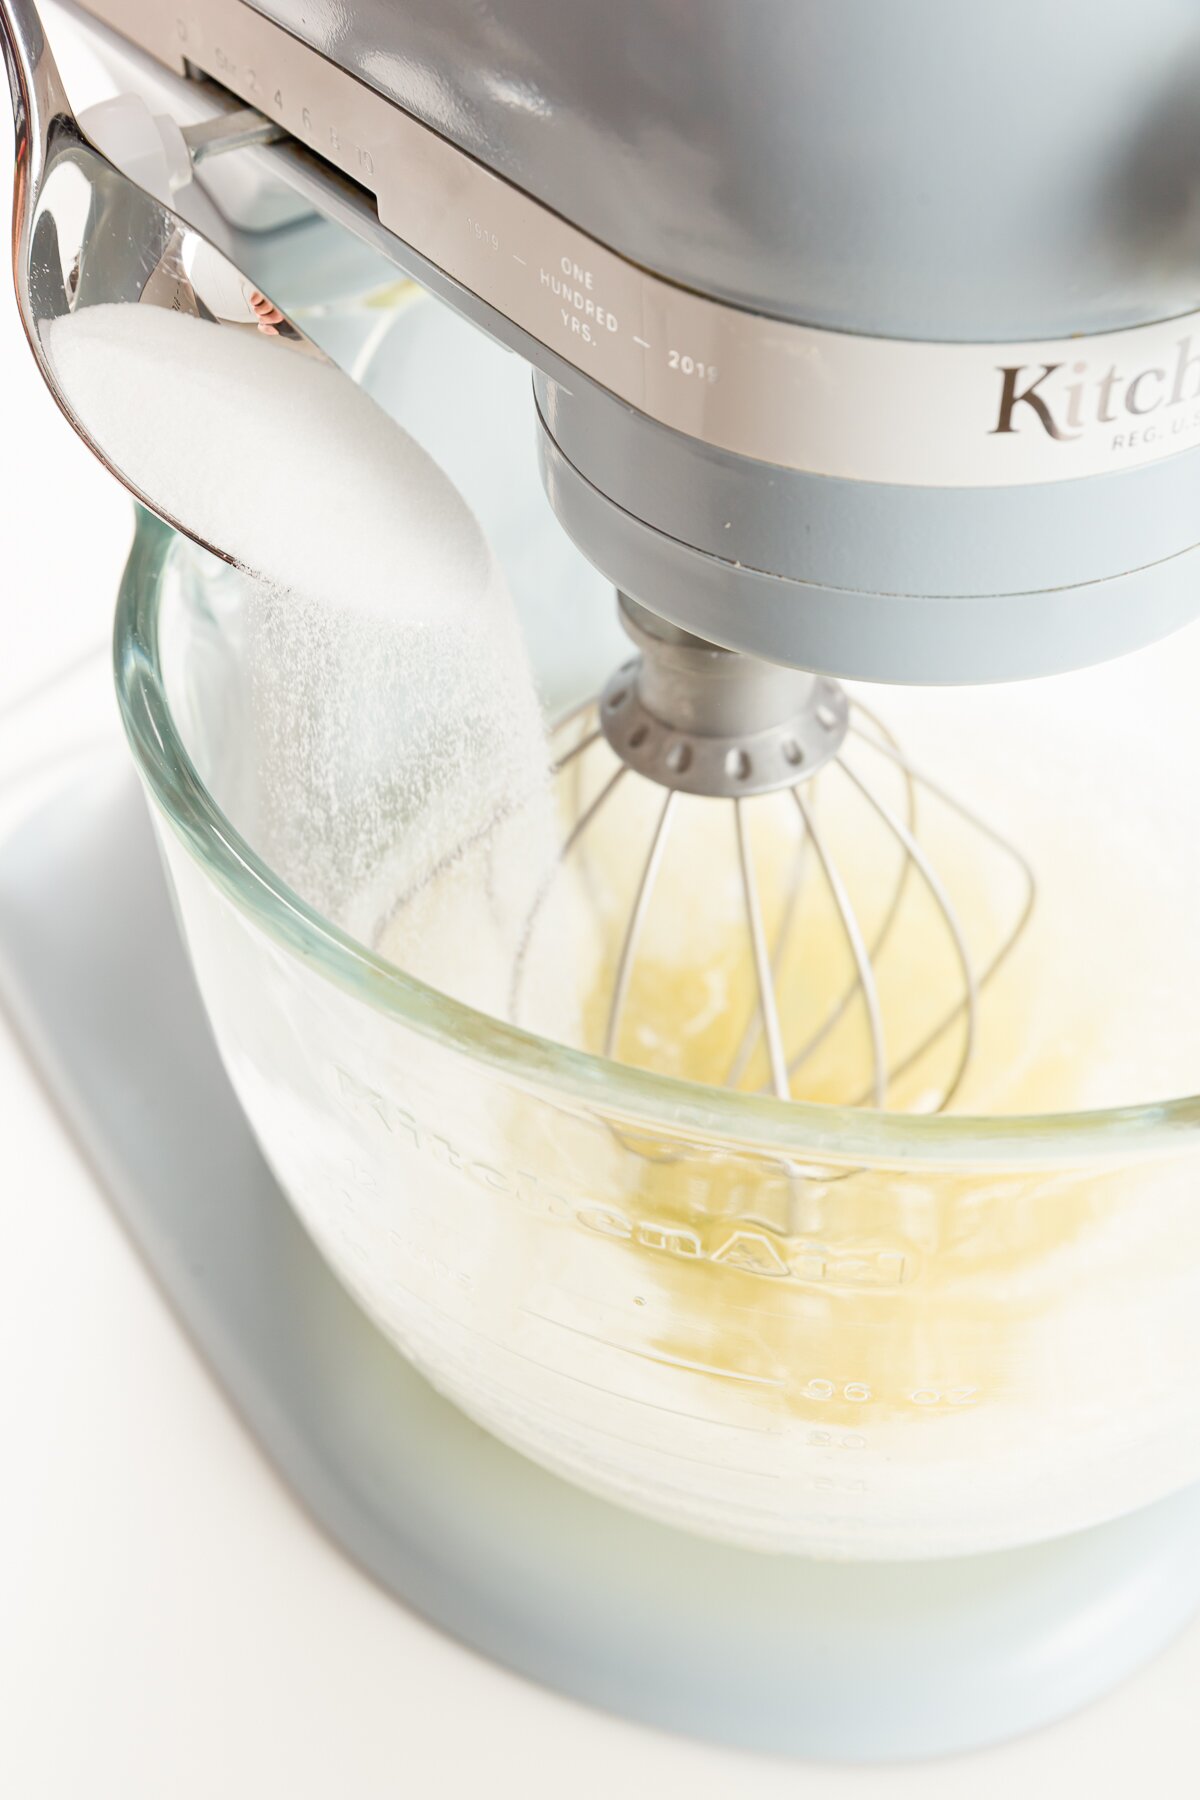 Adding sugar to whisked egg whites in a stand mixer